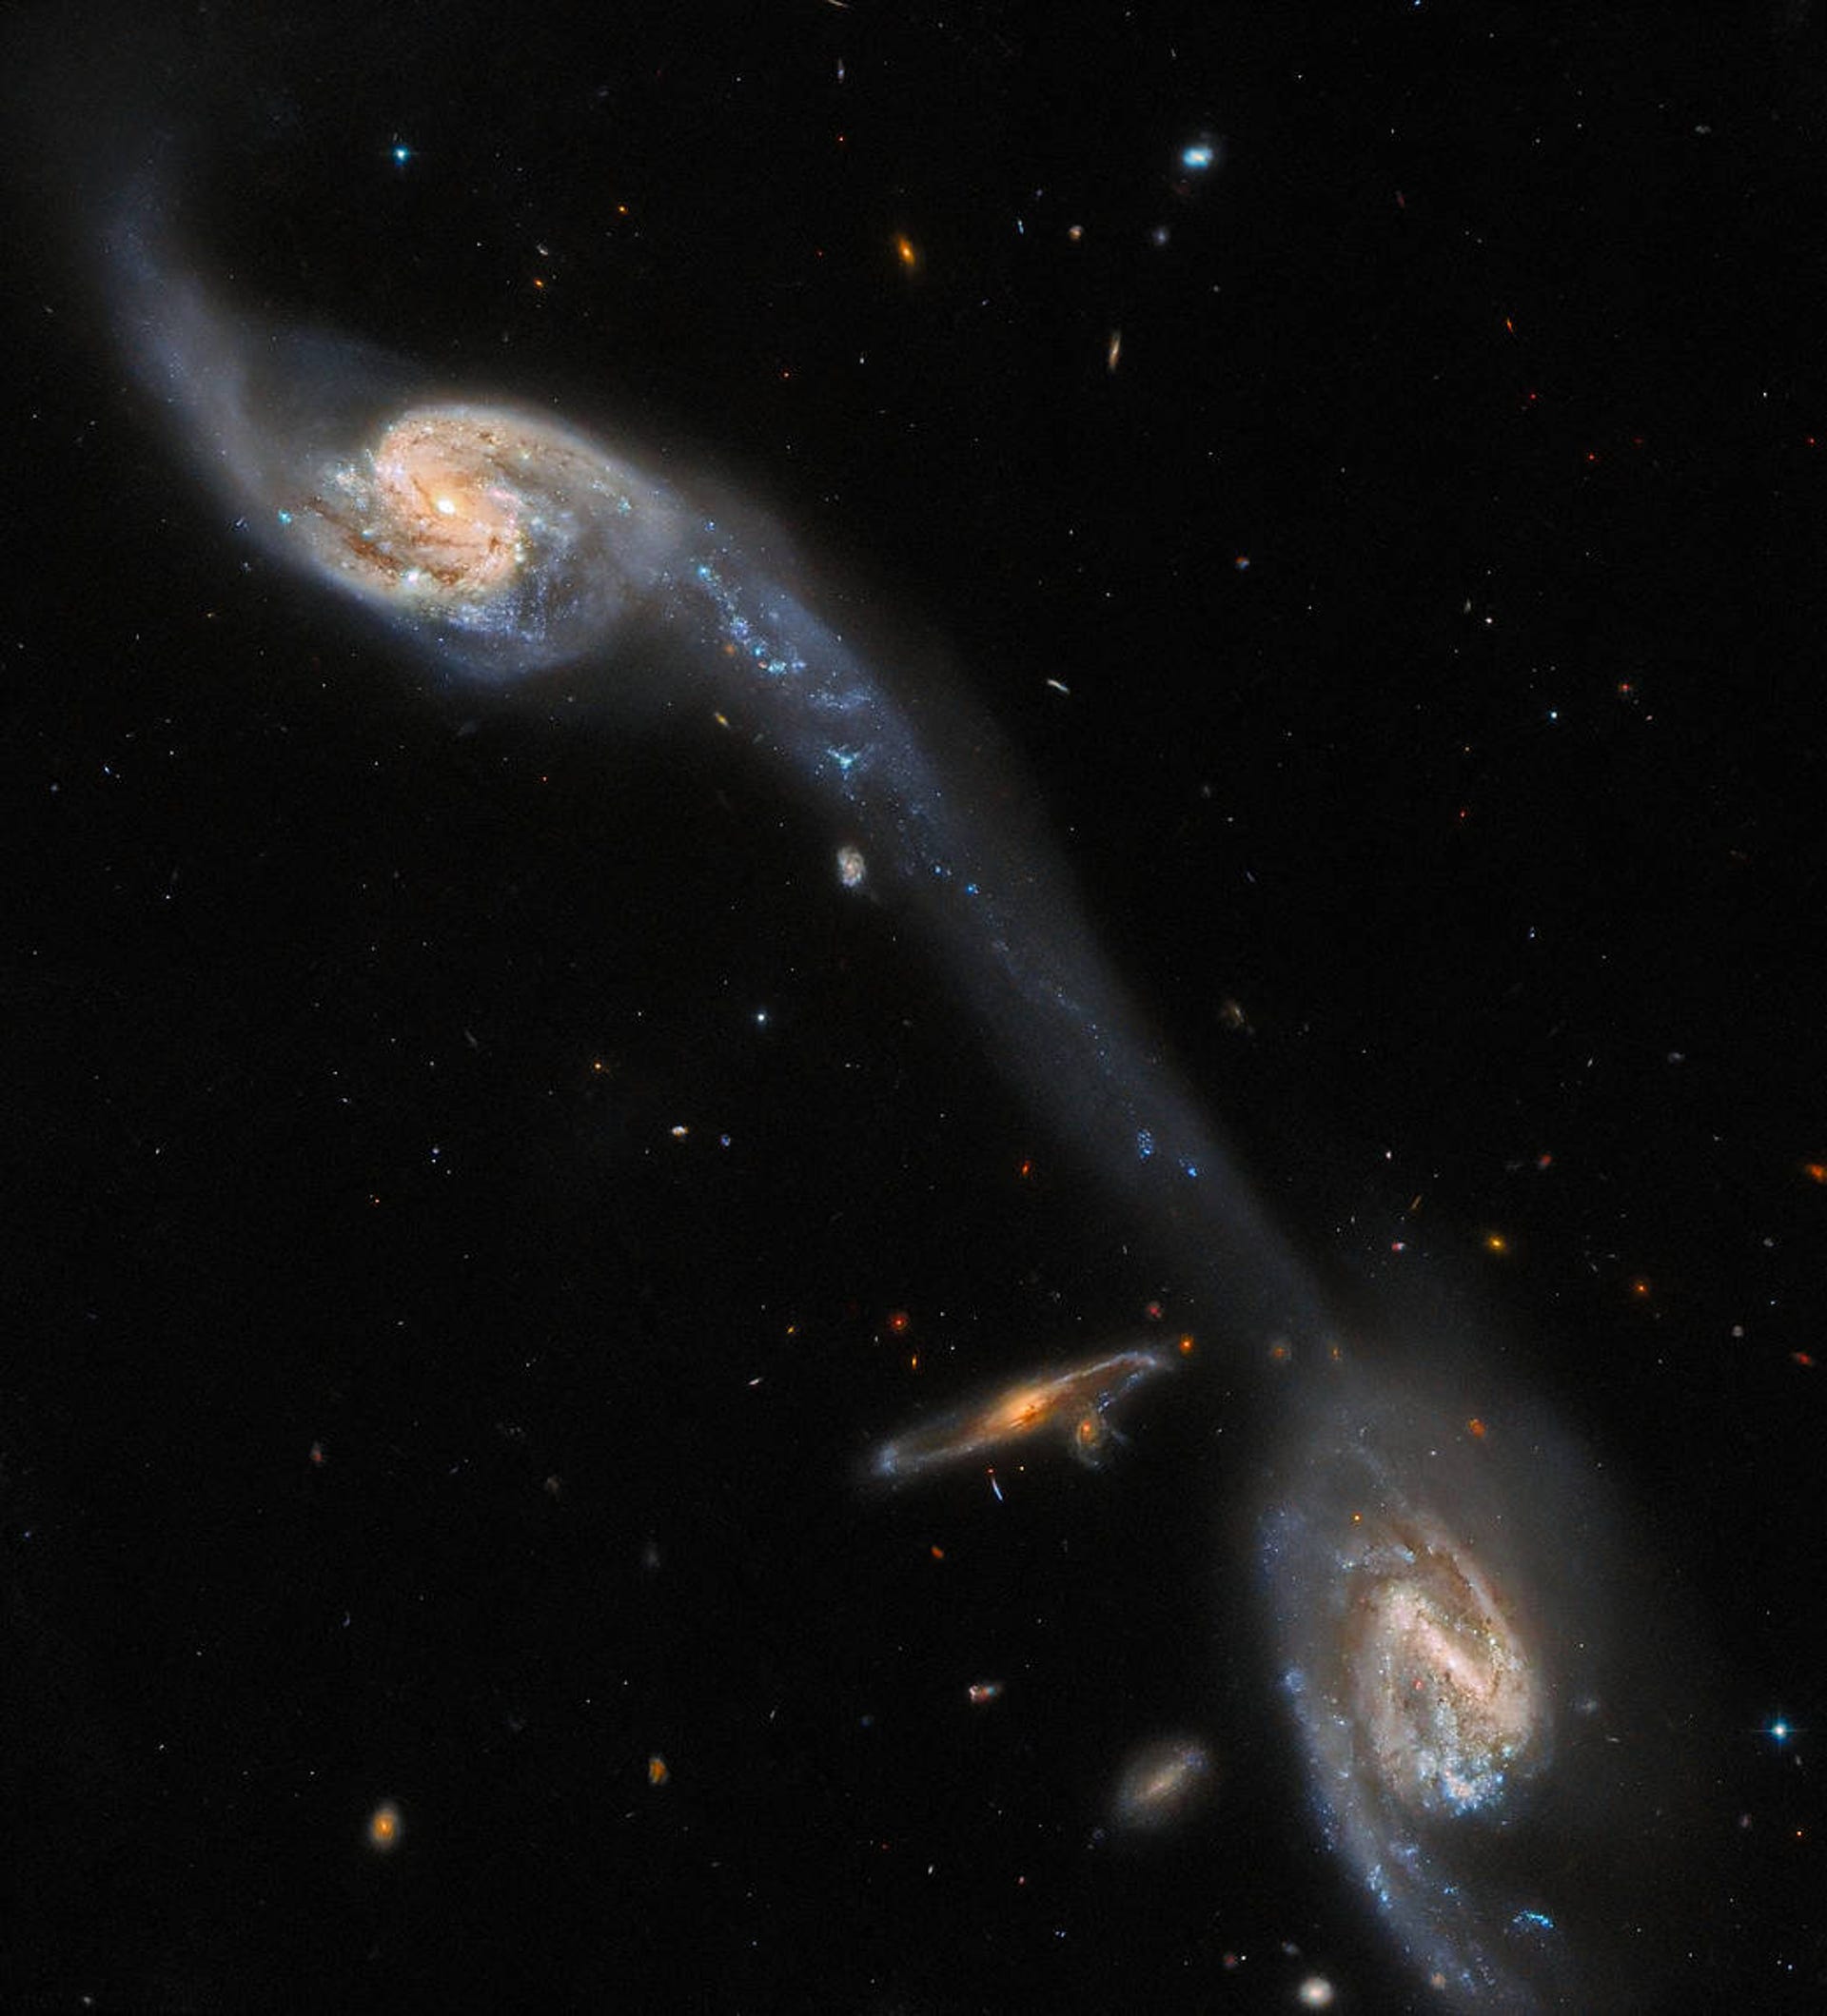 Two galaxies in the foreground appear connected by a wispy, luminous bridge of interstellar dust. A third galaxy is seen in the background, surrounded by many tiny specks of light that represent other, more distant, galaxies across the universe.